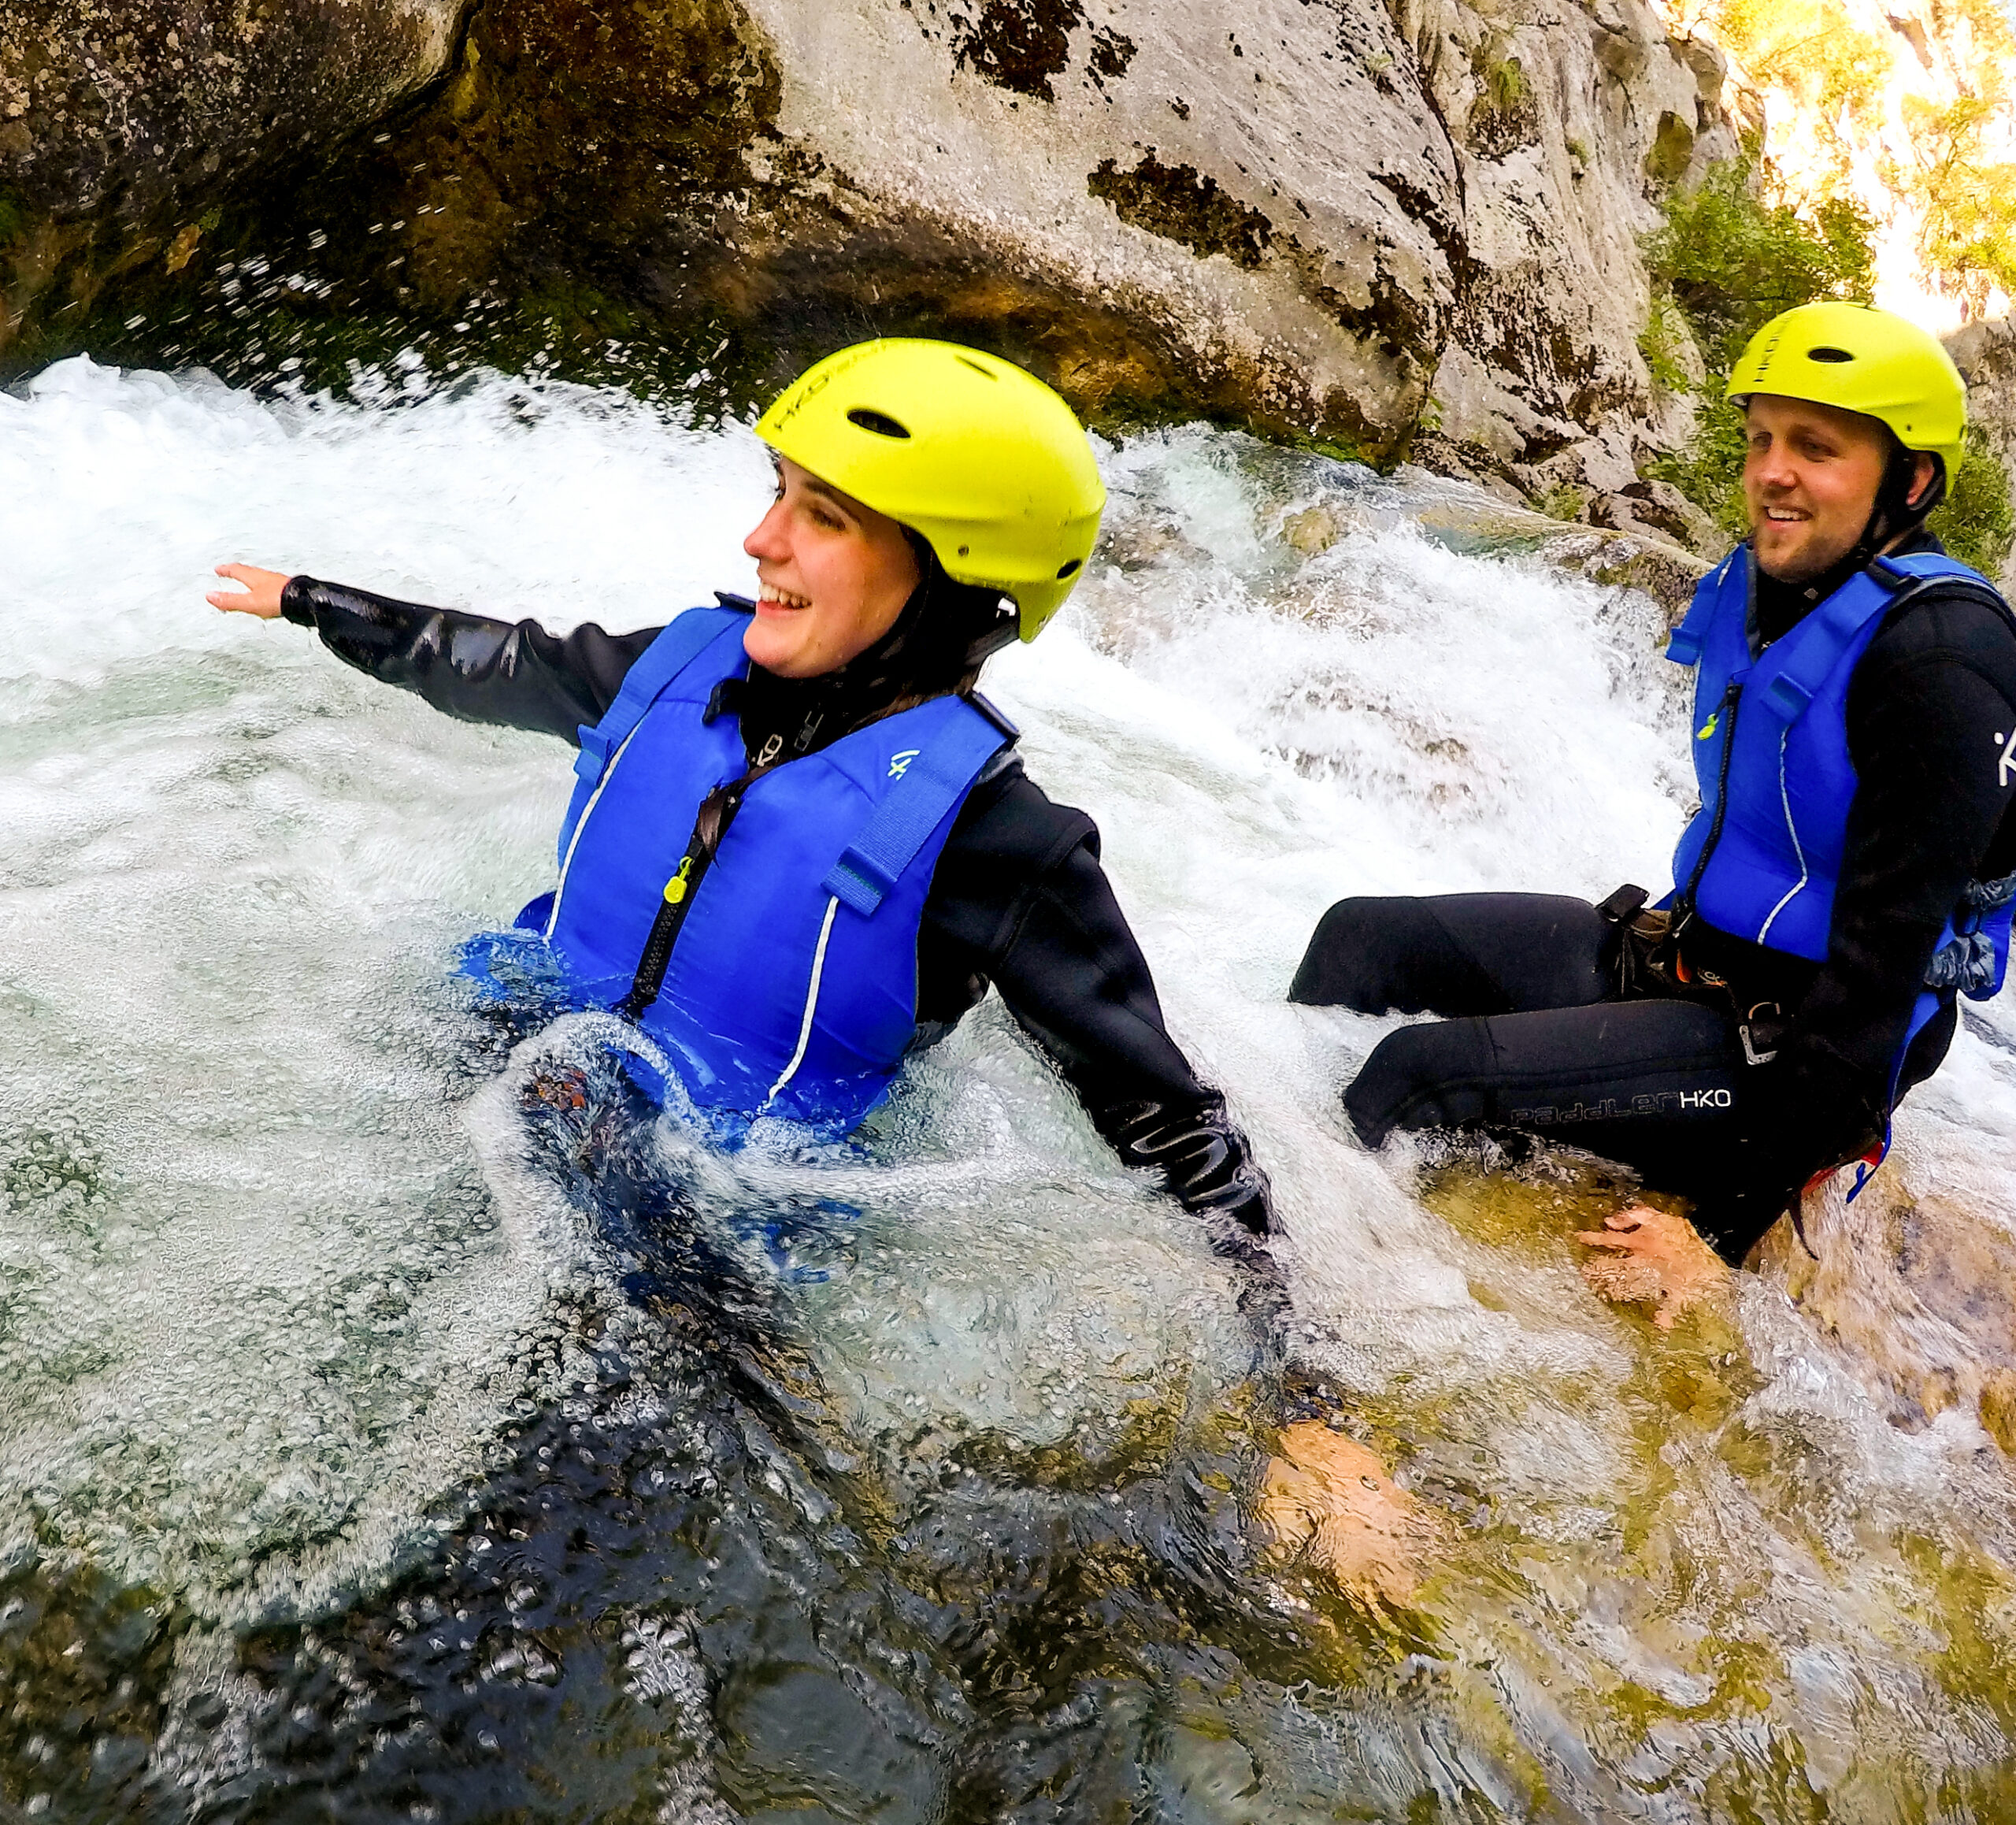 woman canyoning in a river with a yellow helmet and blue life vest